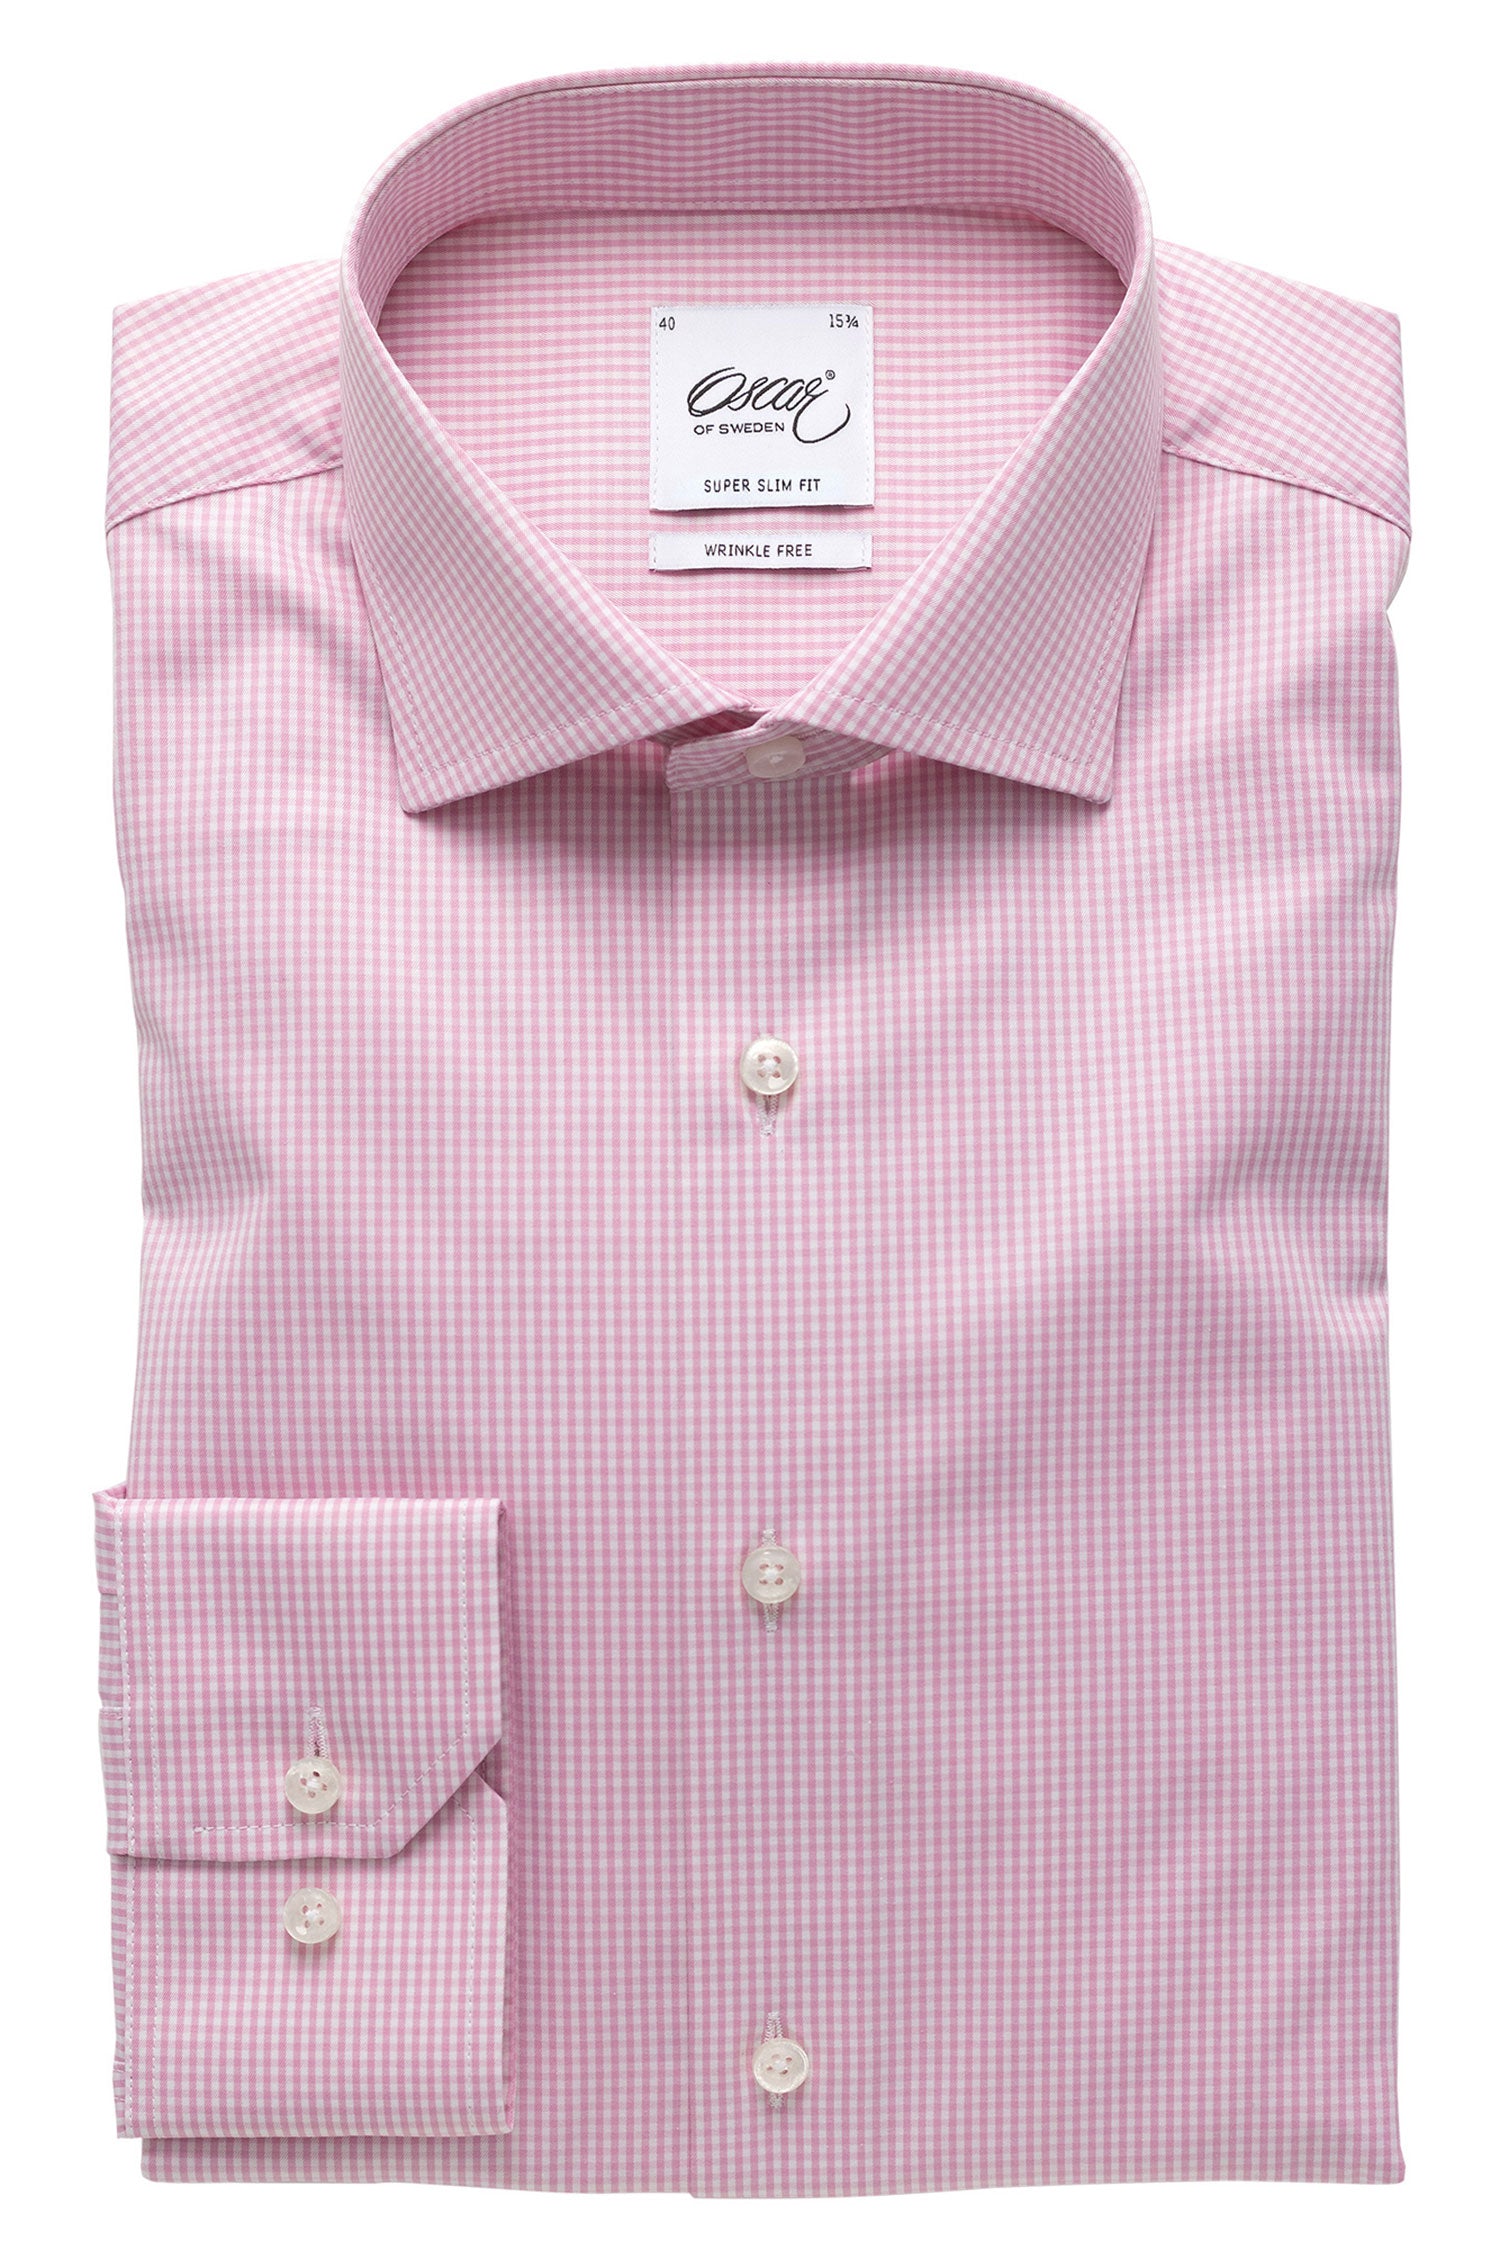 Pink checked super slim fit shirt